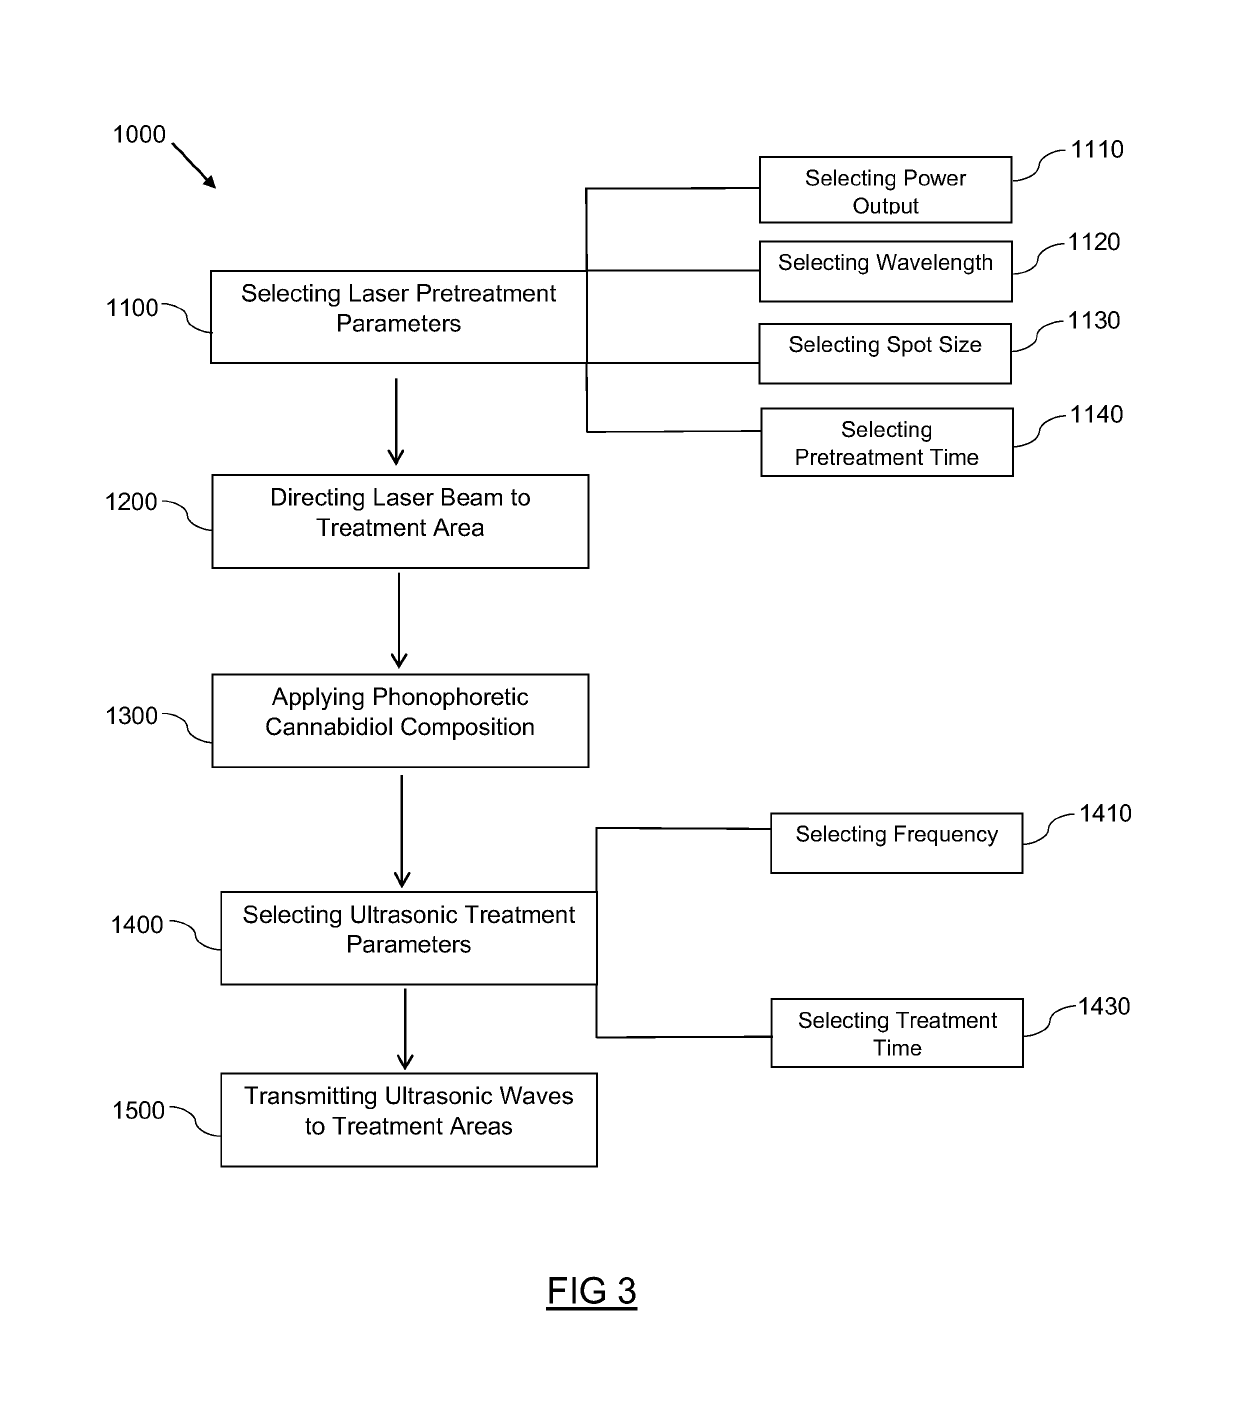 Phonophoretic cannabidiol composition and transdermal delivery system